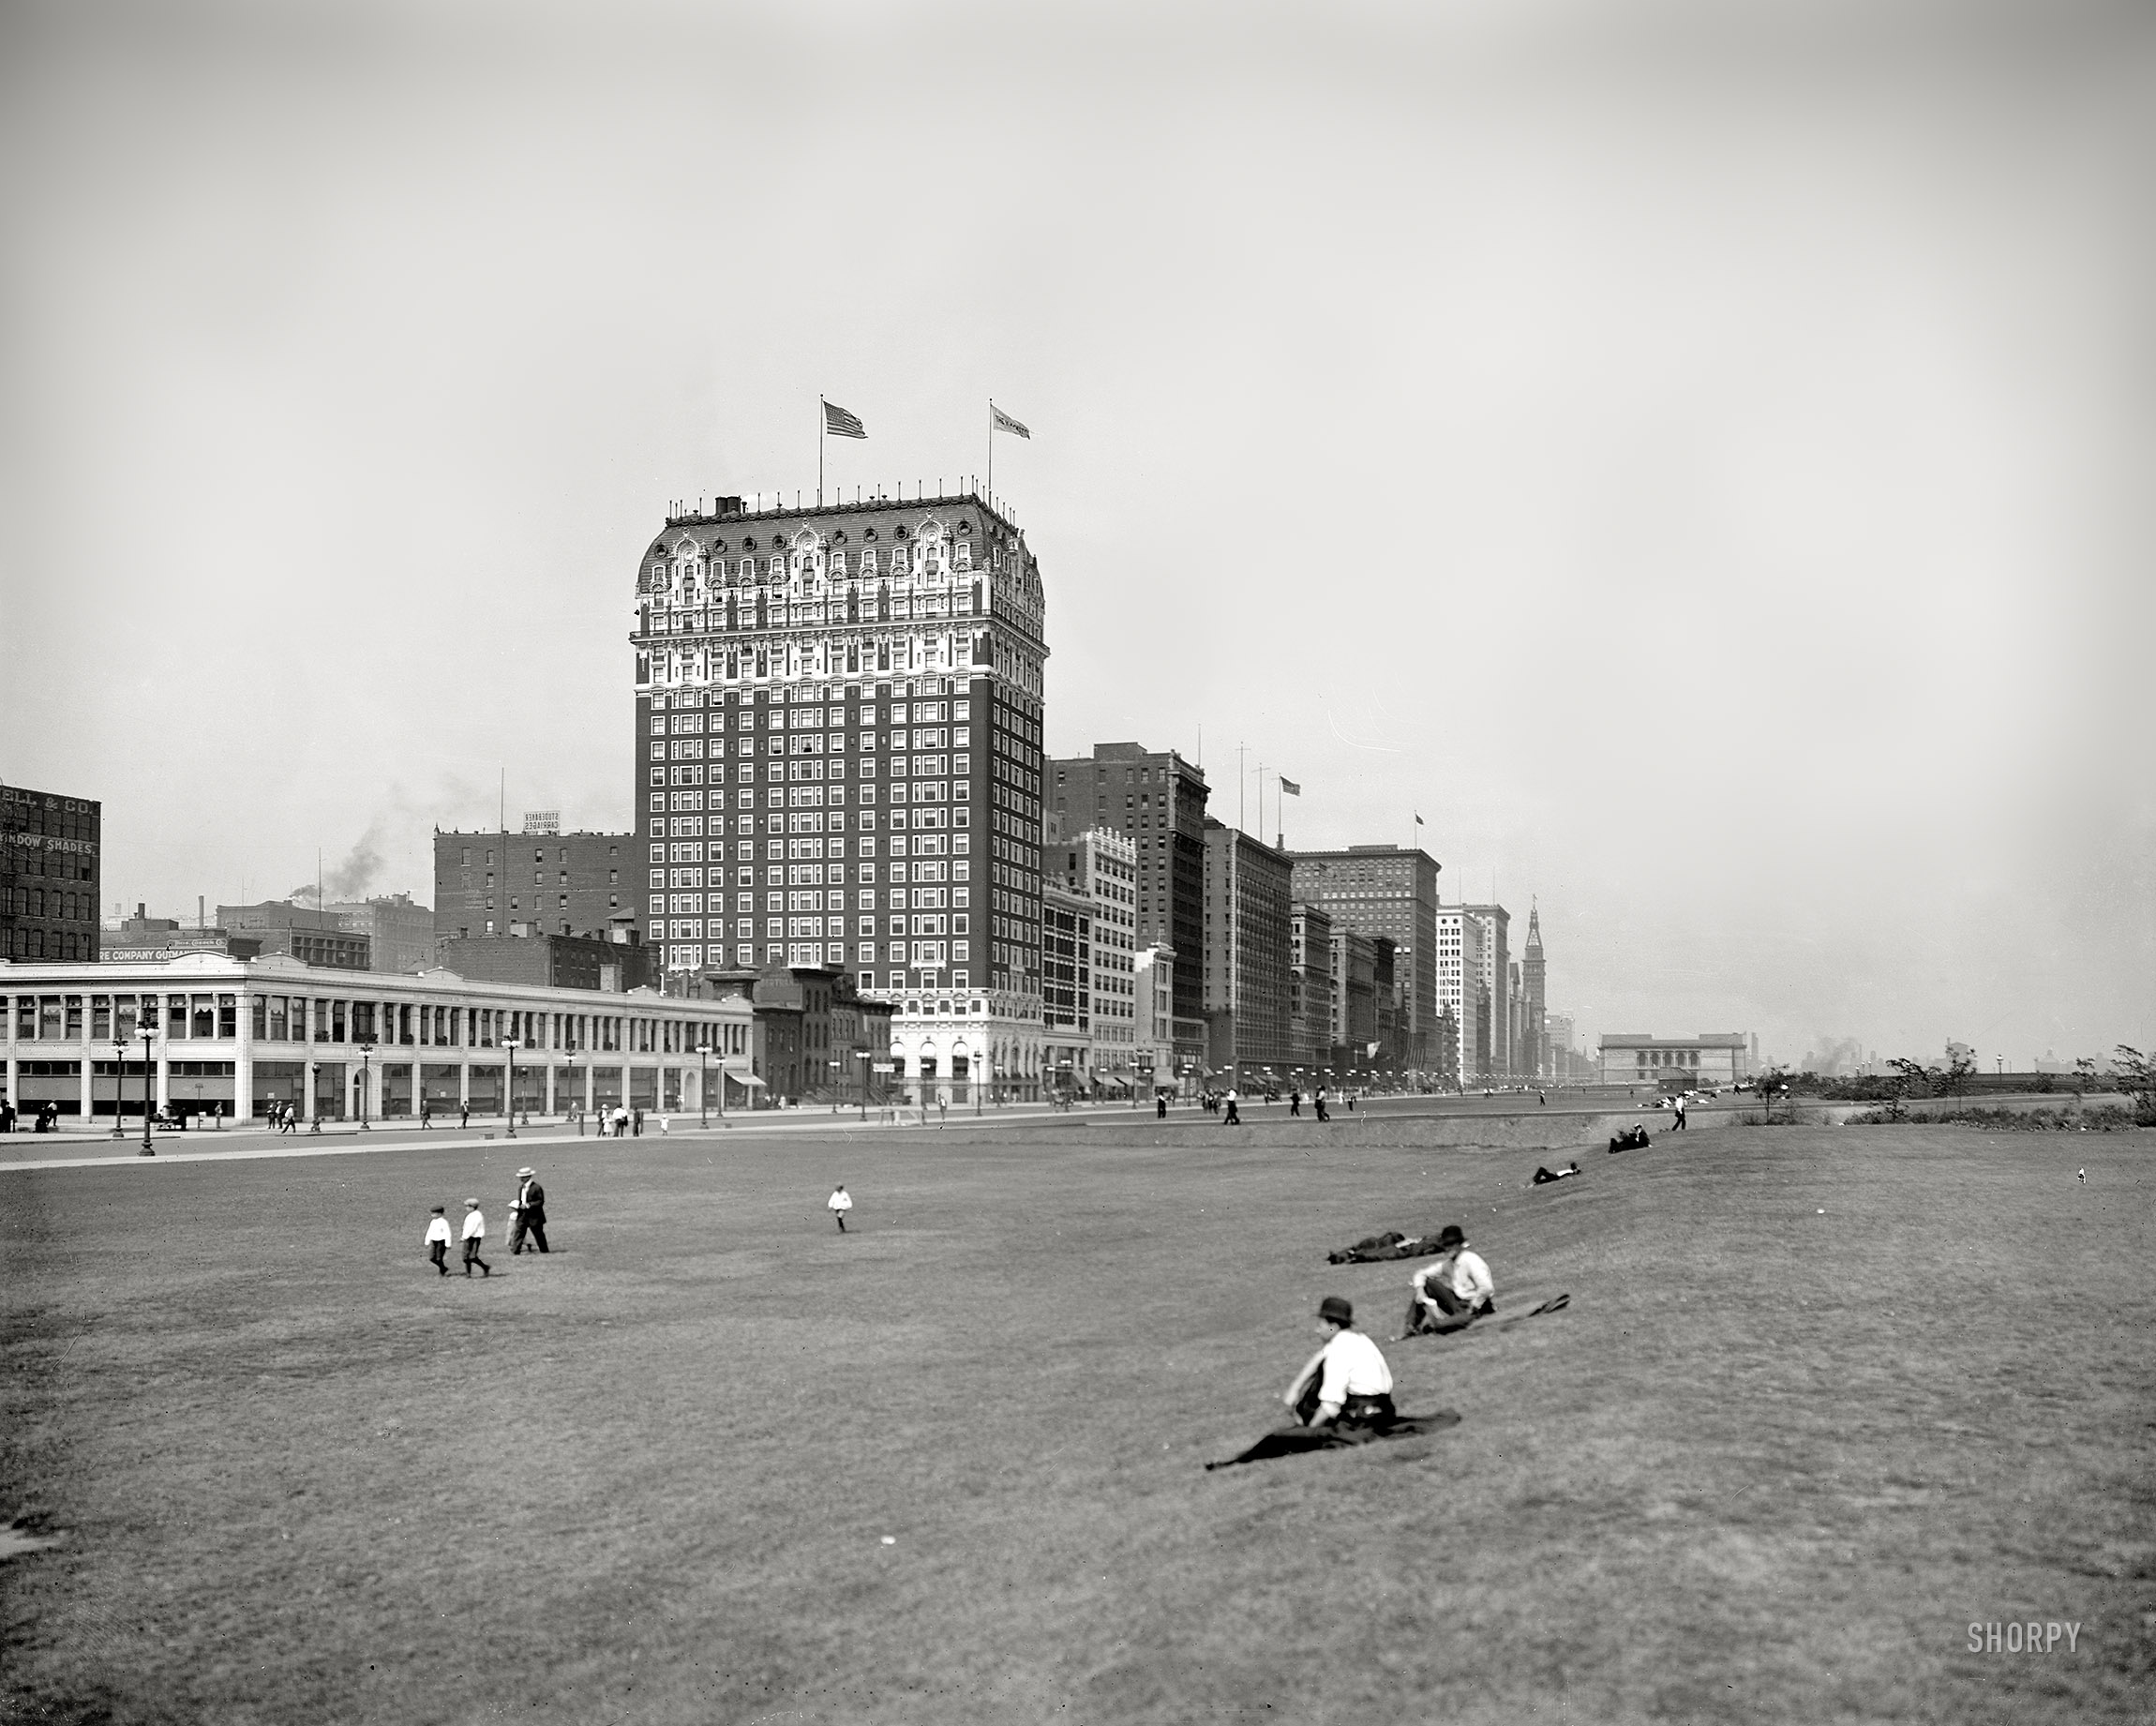 Chicago circa 1910. "Grant Park and Blackstone Hotel on  Michigan Avenue." Note the STUDEBAKER CARRIAGES sign. 8x10 glass negative. View full size.